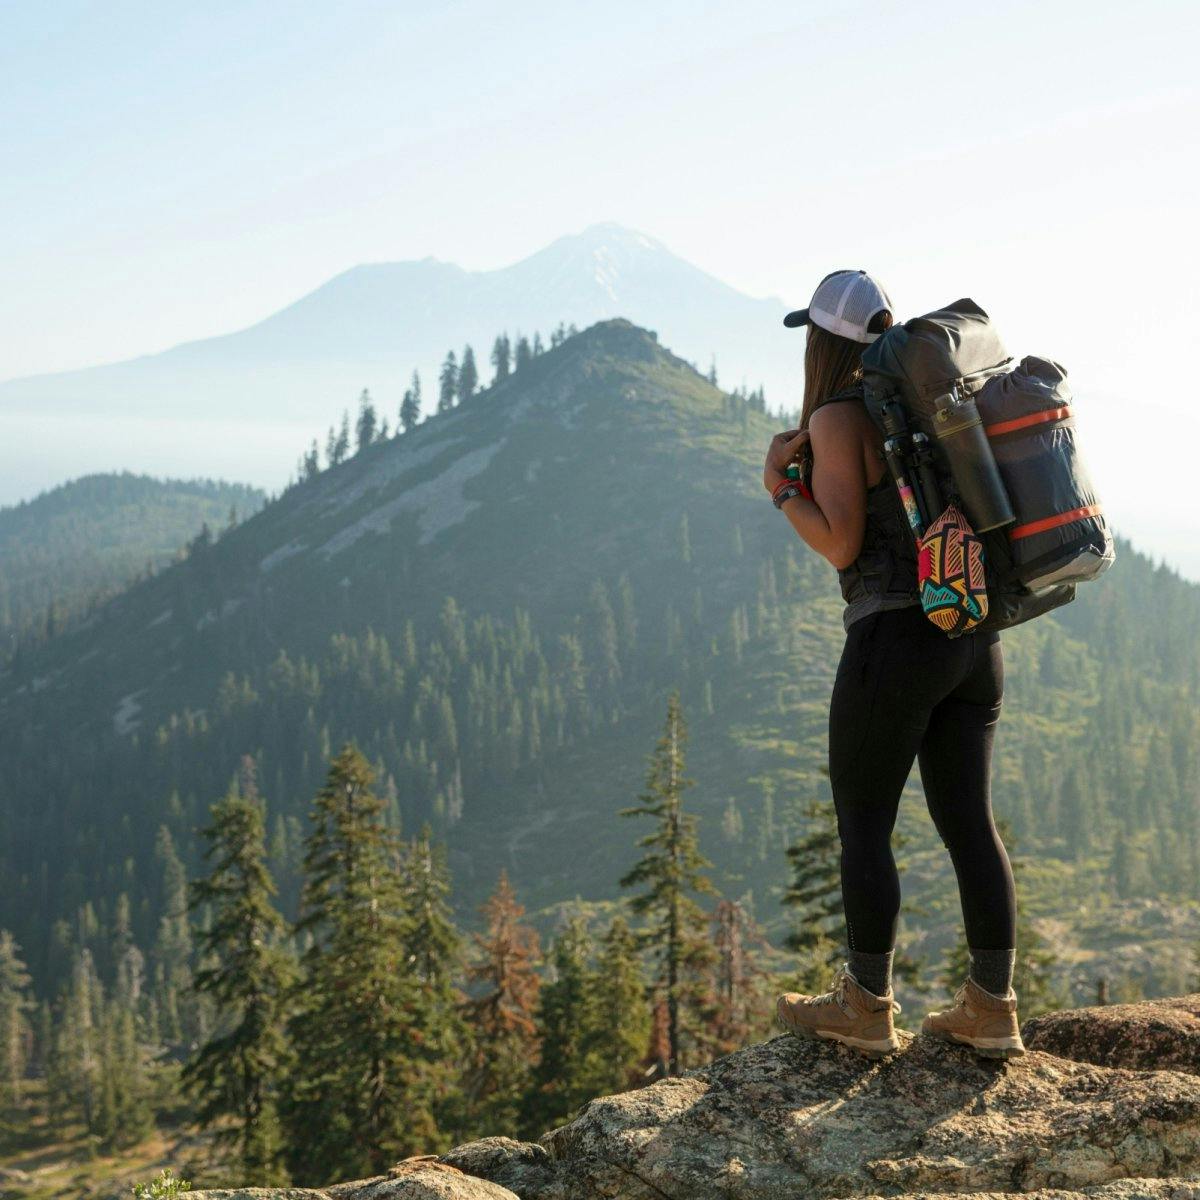 The Last Hunt  Up to 80% Off Outdoor Gear and Clothing